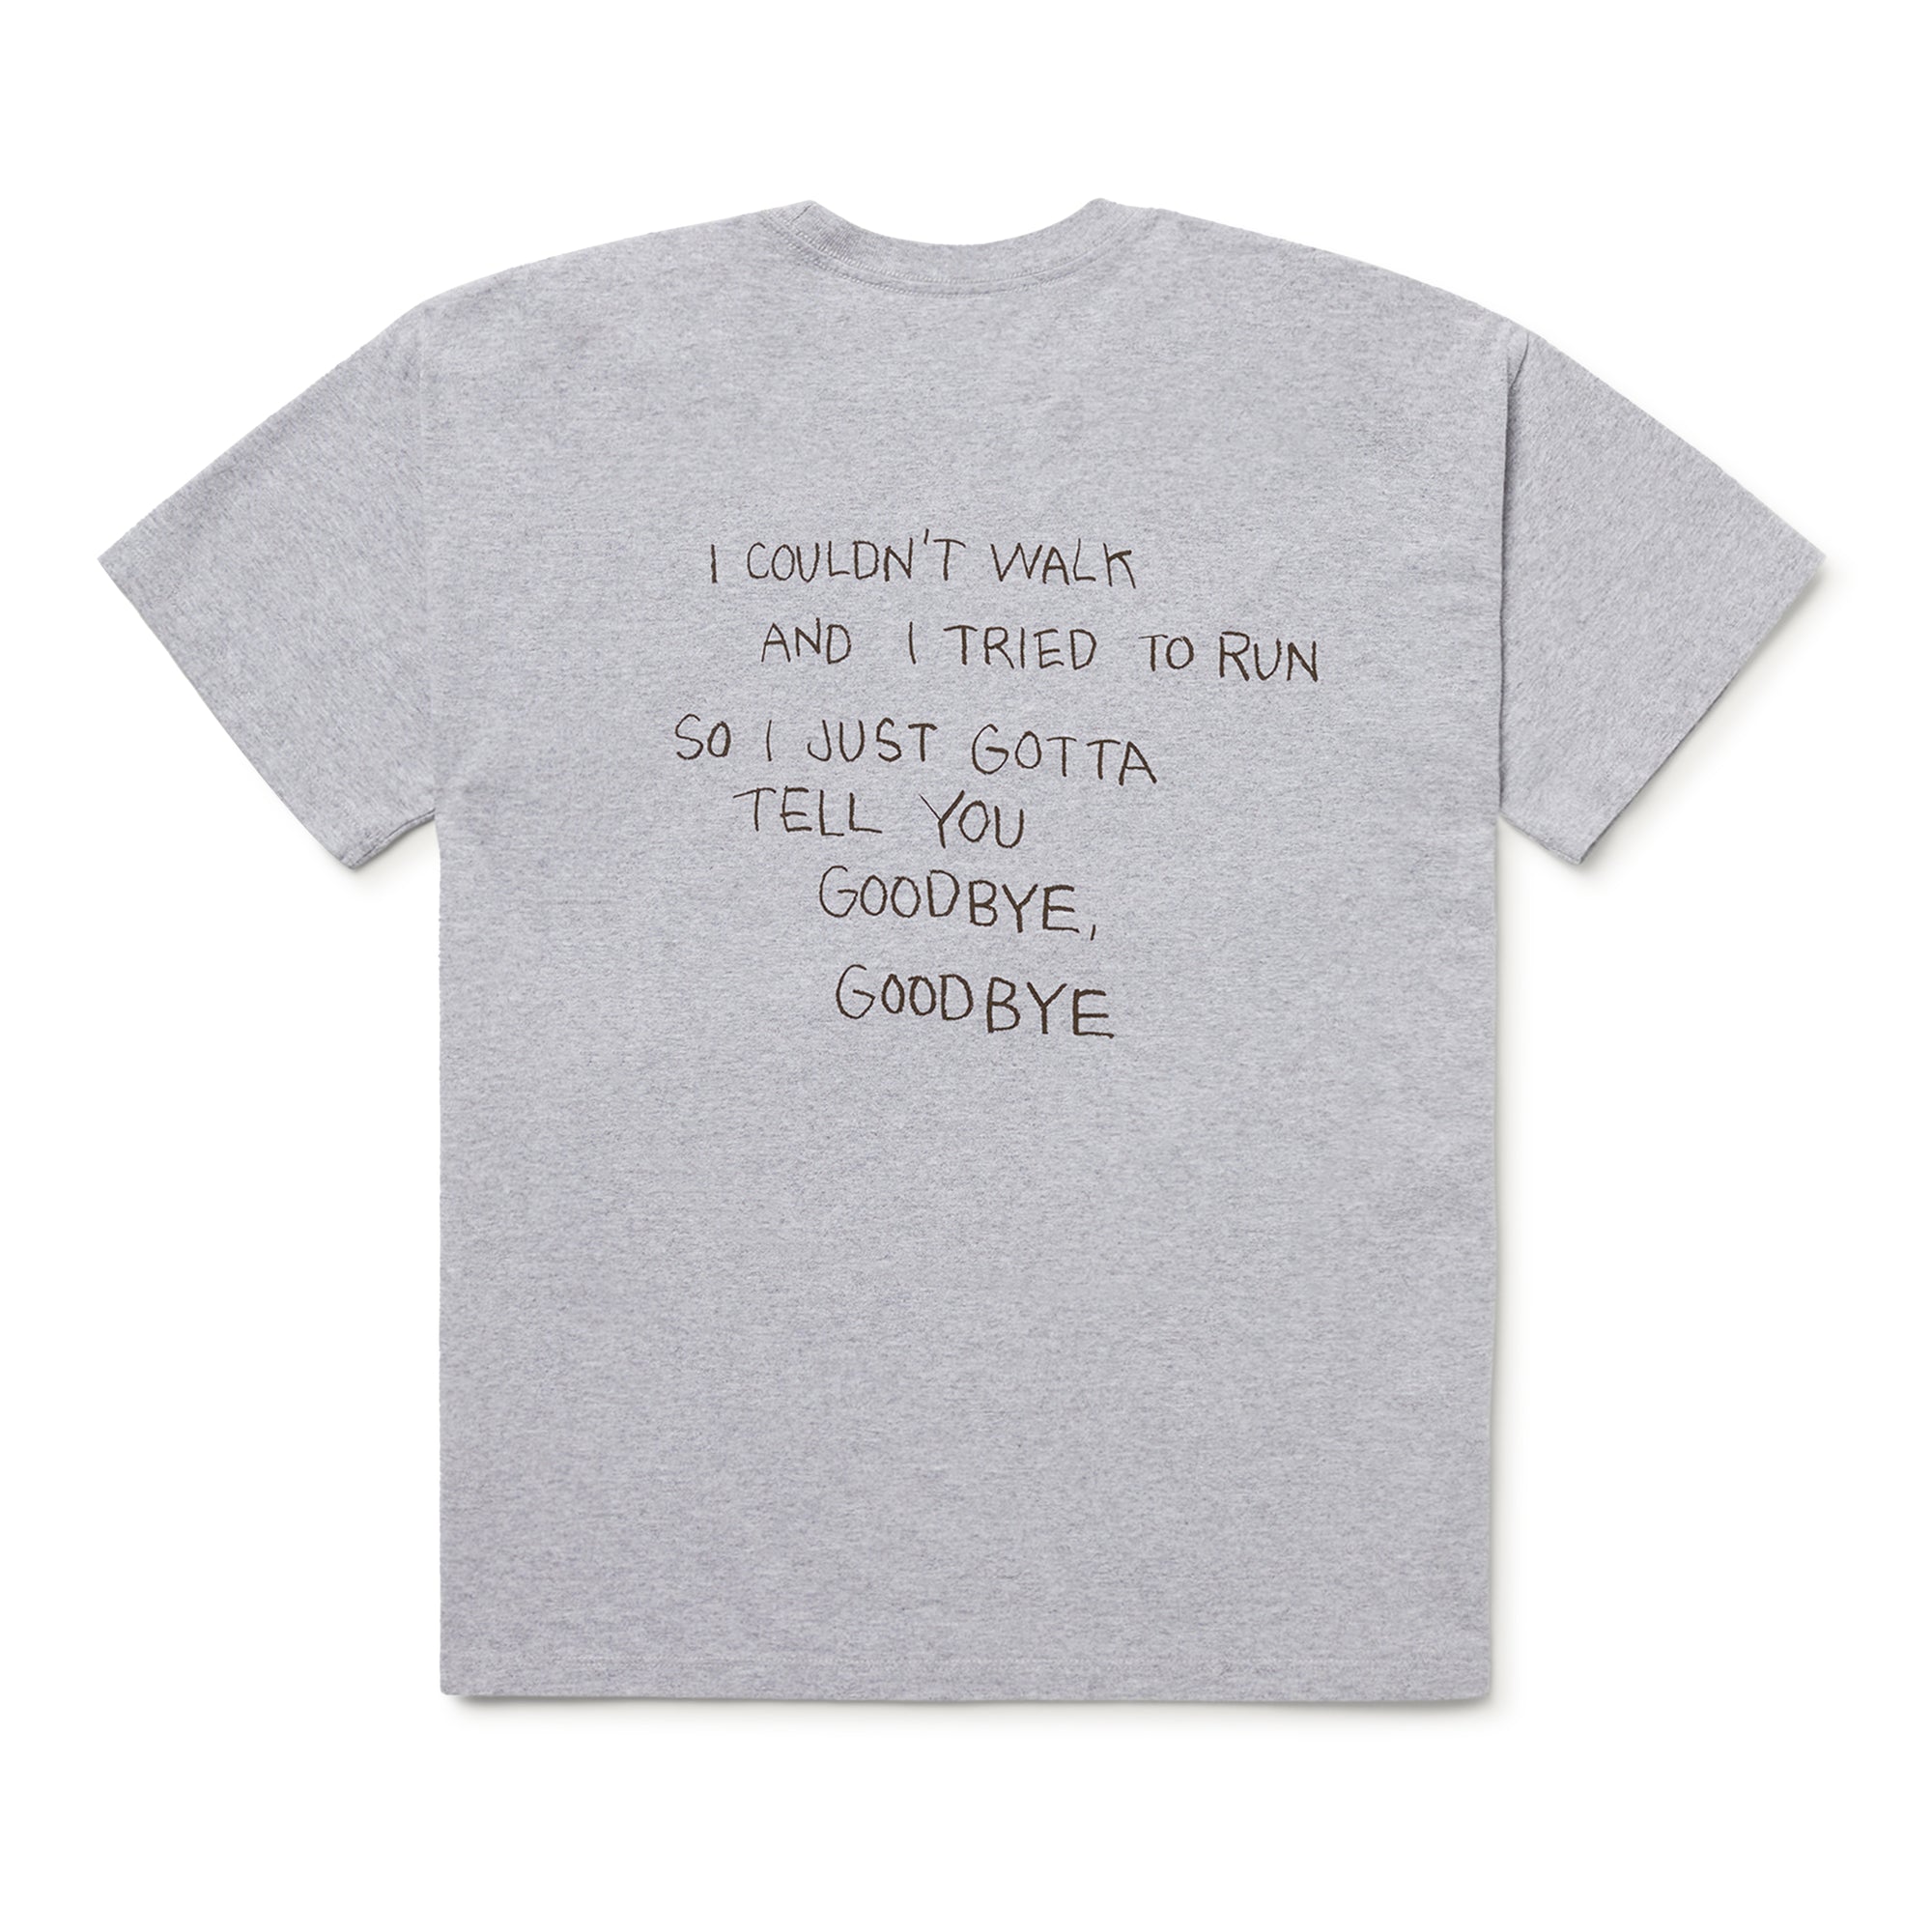 One of These Days - Goodbye Tee - (Heather Grey) view 2